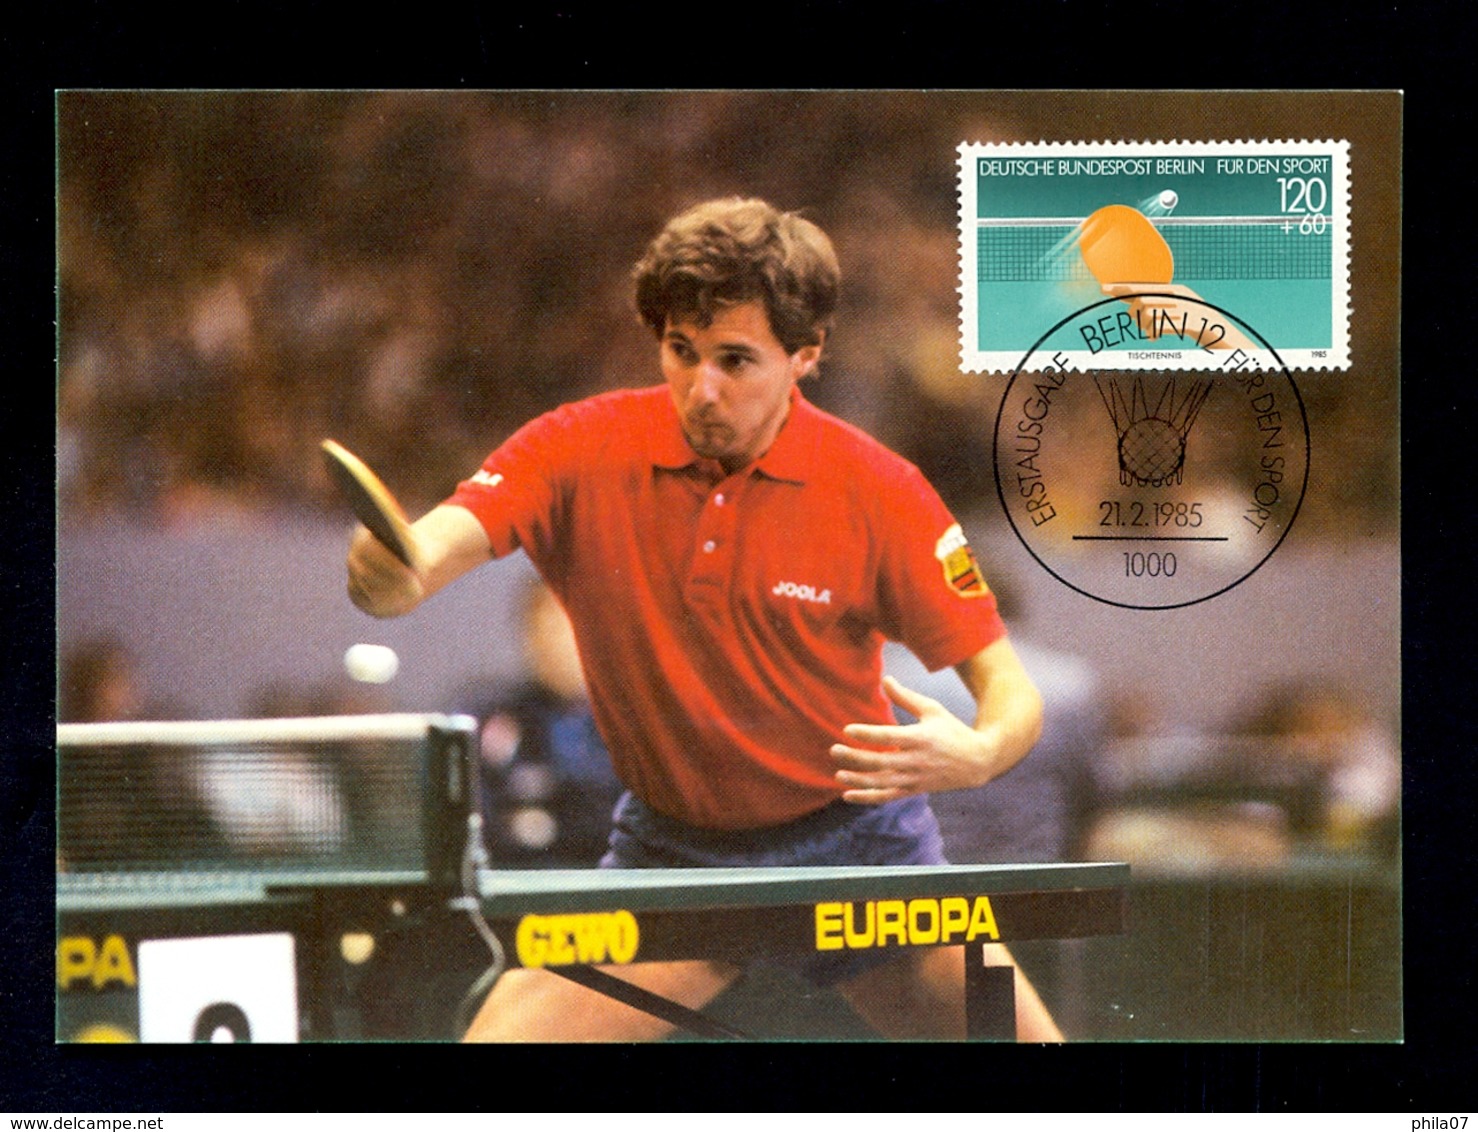 GERMANY 1985 - Commemorative Card, Cancel And Stamp For TABLE TENNIS - Table Tennis